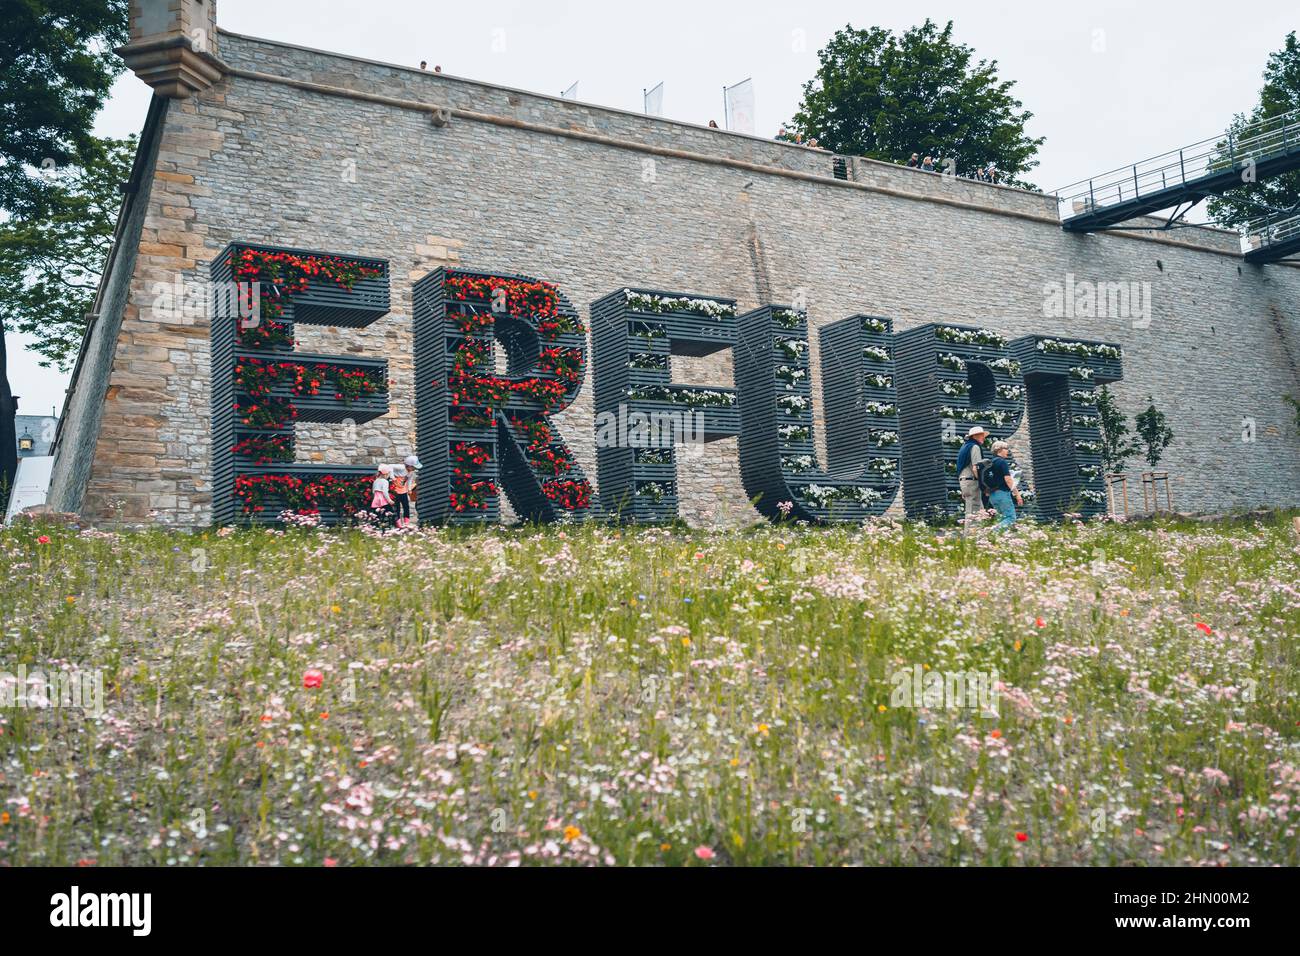 Sign of Erfurt city in big capital letters in Germany Stock Photo